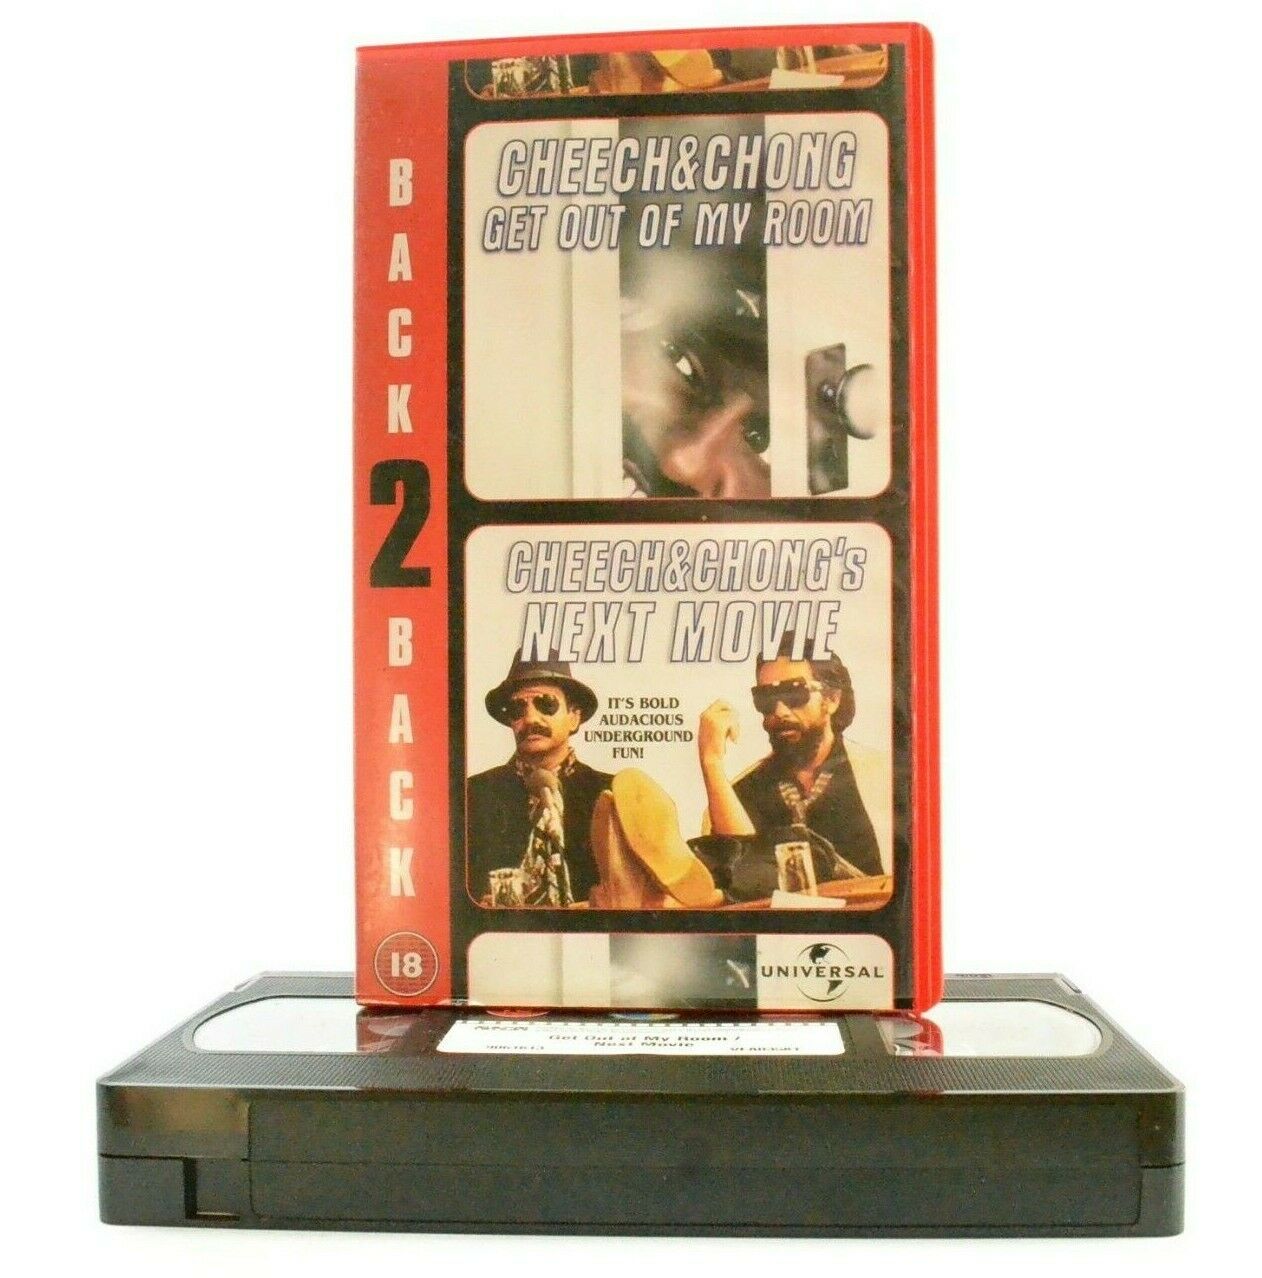 Cheech And Chong: Get Out Of My Room/Next Movie - 2 On 1 Stoner Comedy- Pal VHS-